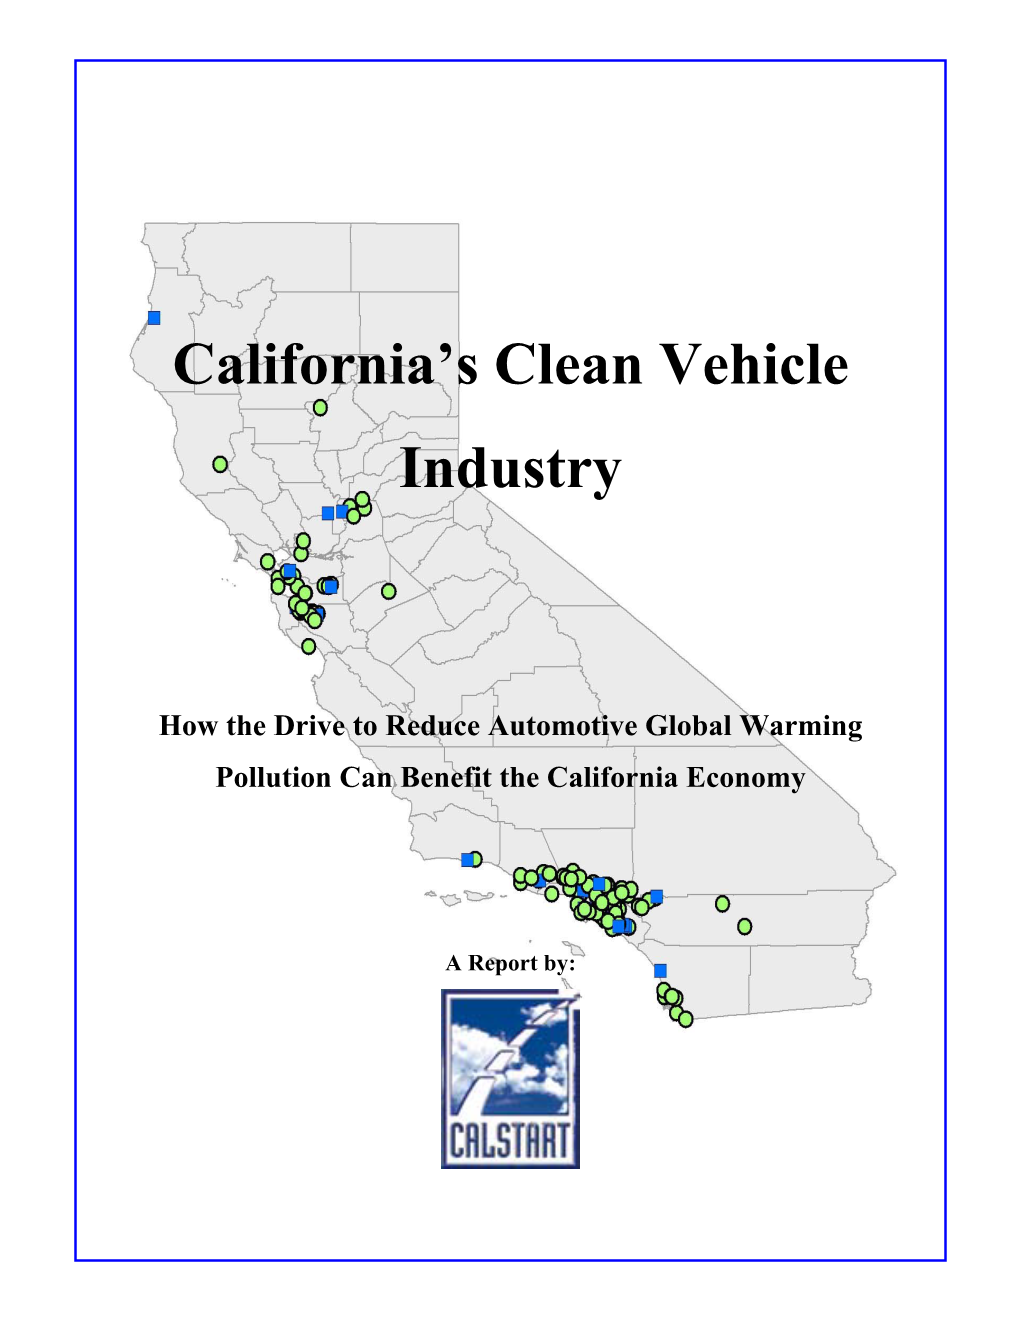 California's Clean Vehicle Industry